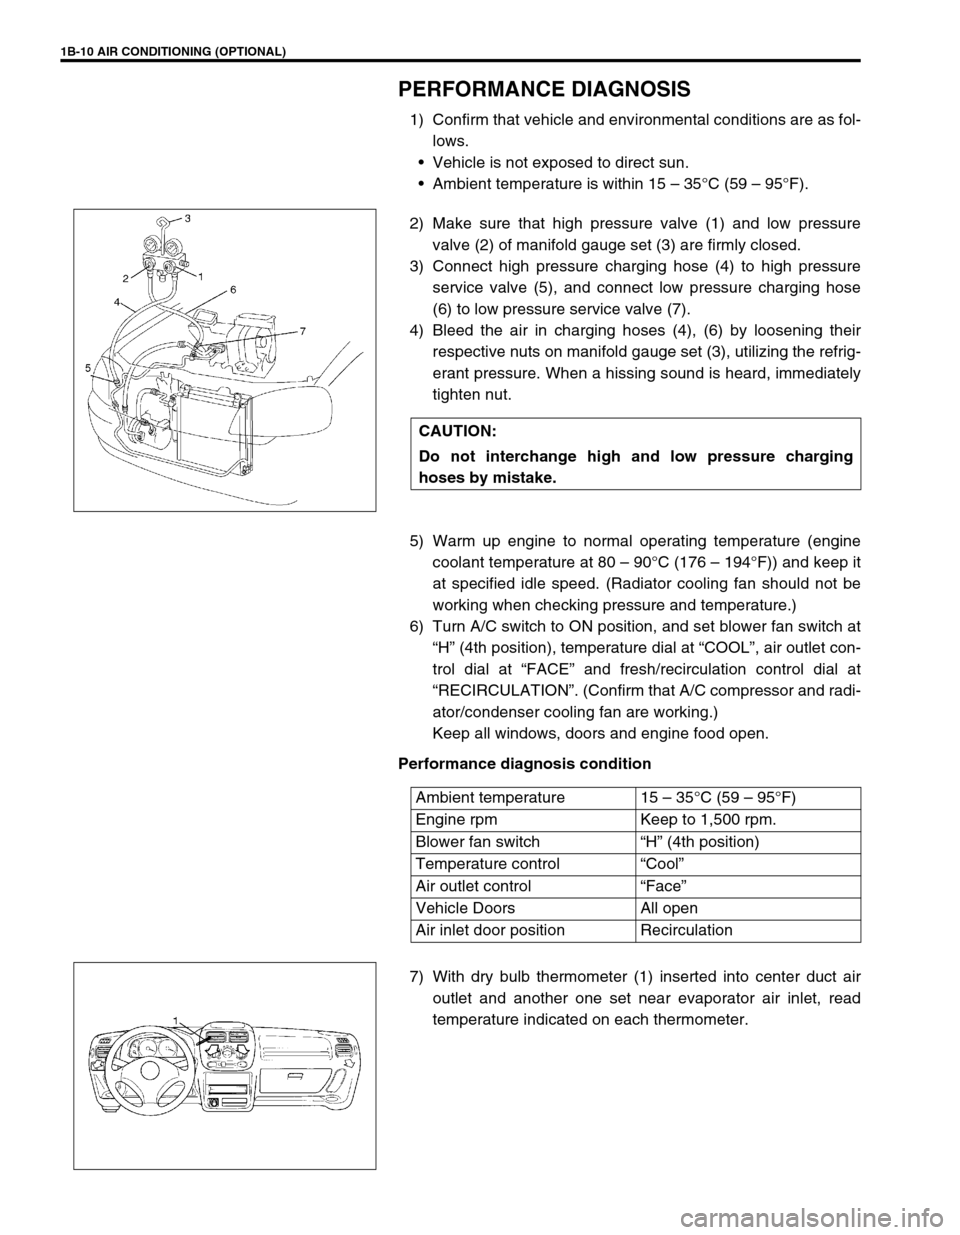 SUZUKI SWIFT 2000 1.G RG413 Service Workshop Manual 1B-10 AIR CONDITIONING (OPTIONAL)
PERFORMANCE DIAGNOSIS
1) Confirm that vehicle and environmental conditions are as fol-
lows.
Vehicle is not exposed to direct sun.
Ambient temperature is within 15 